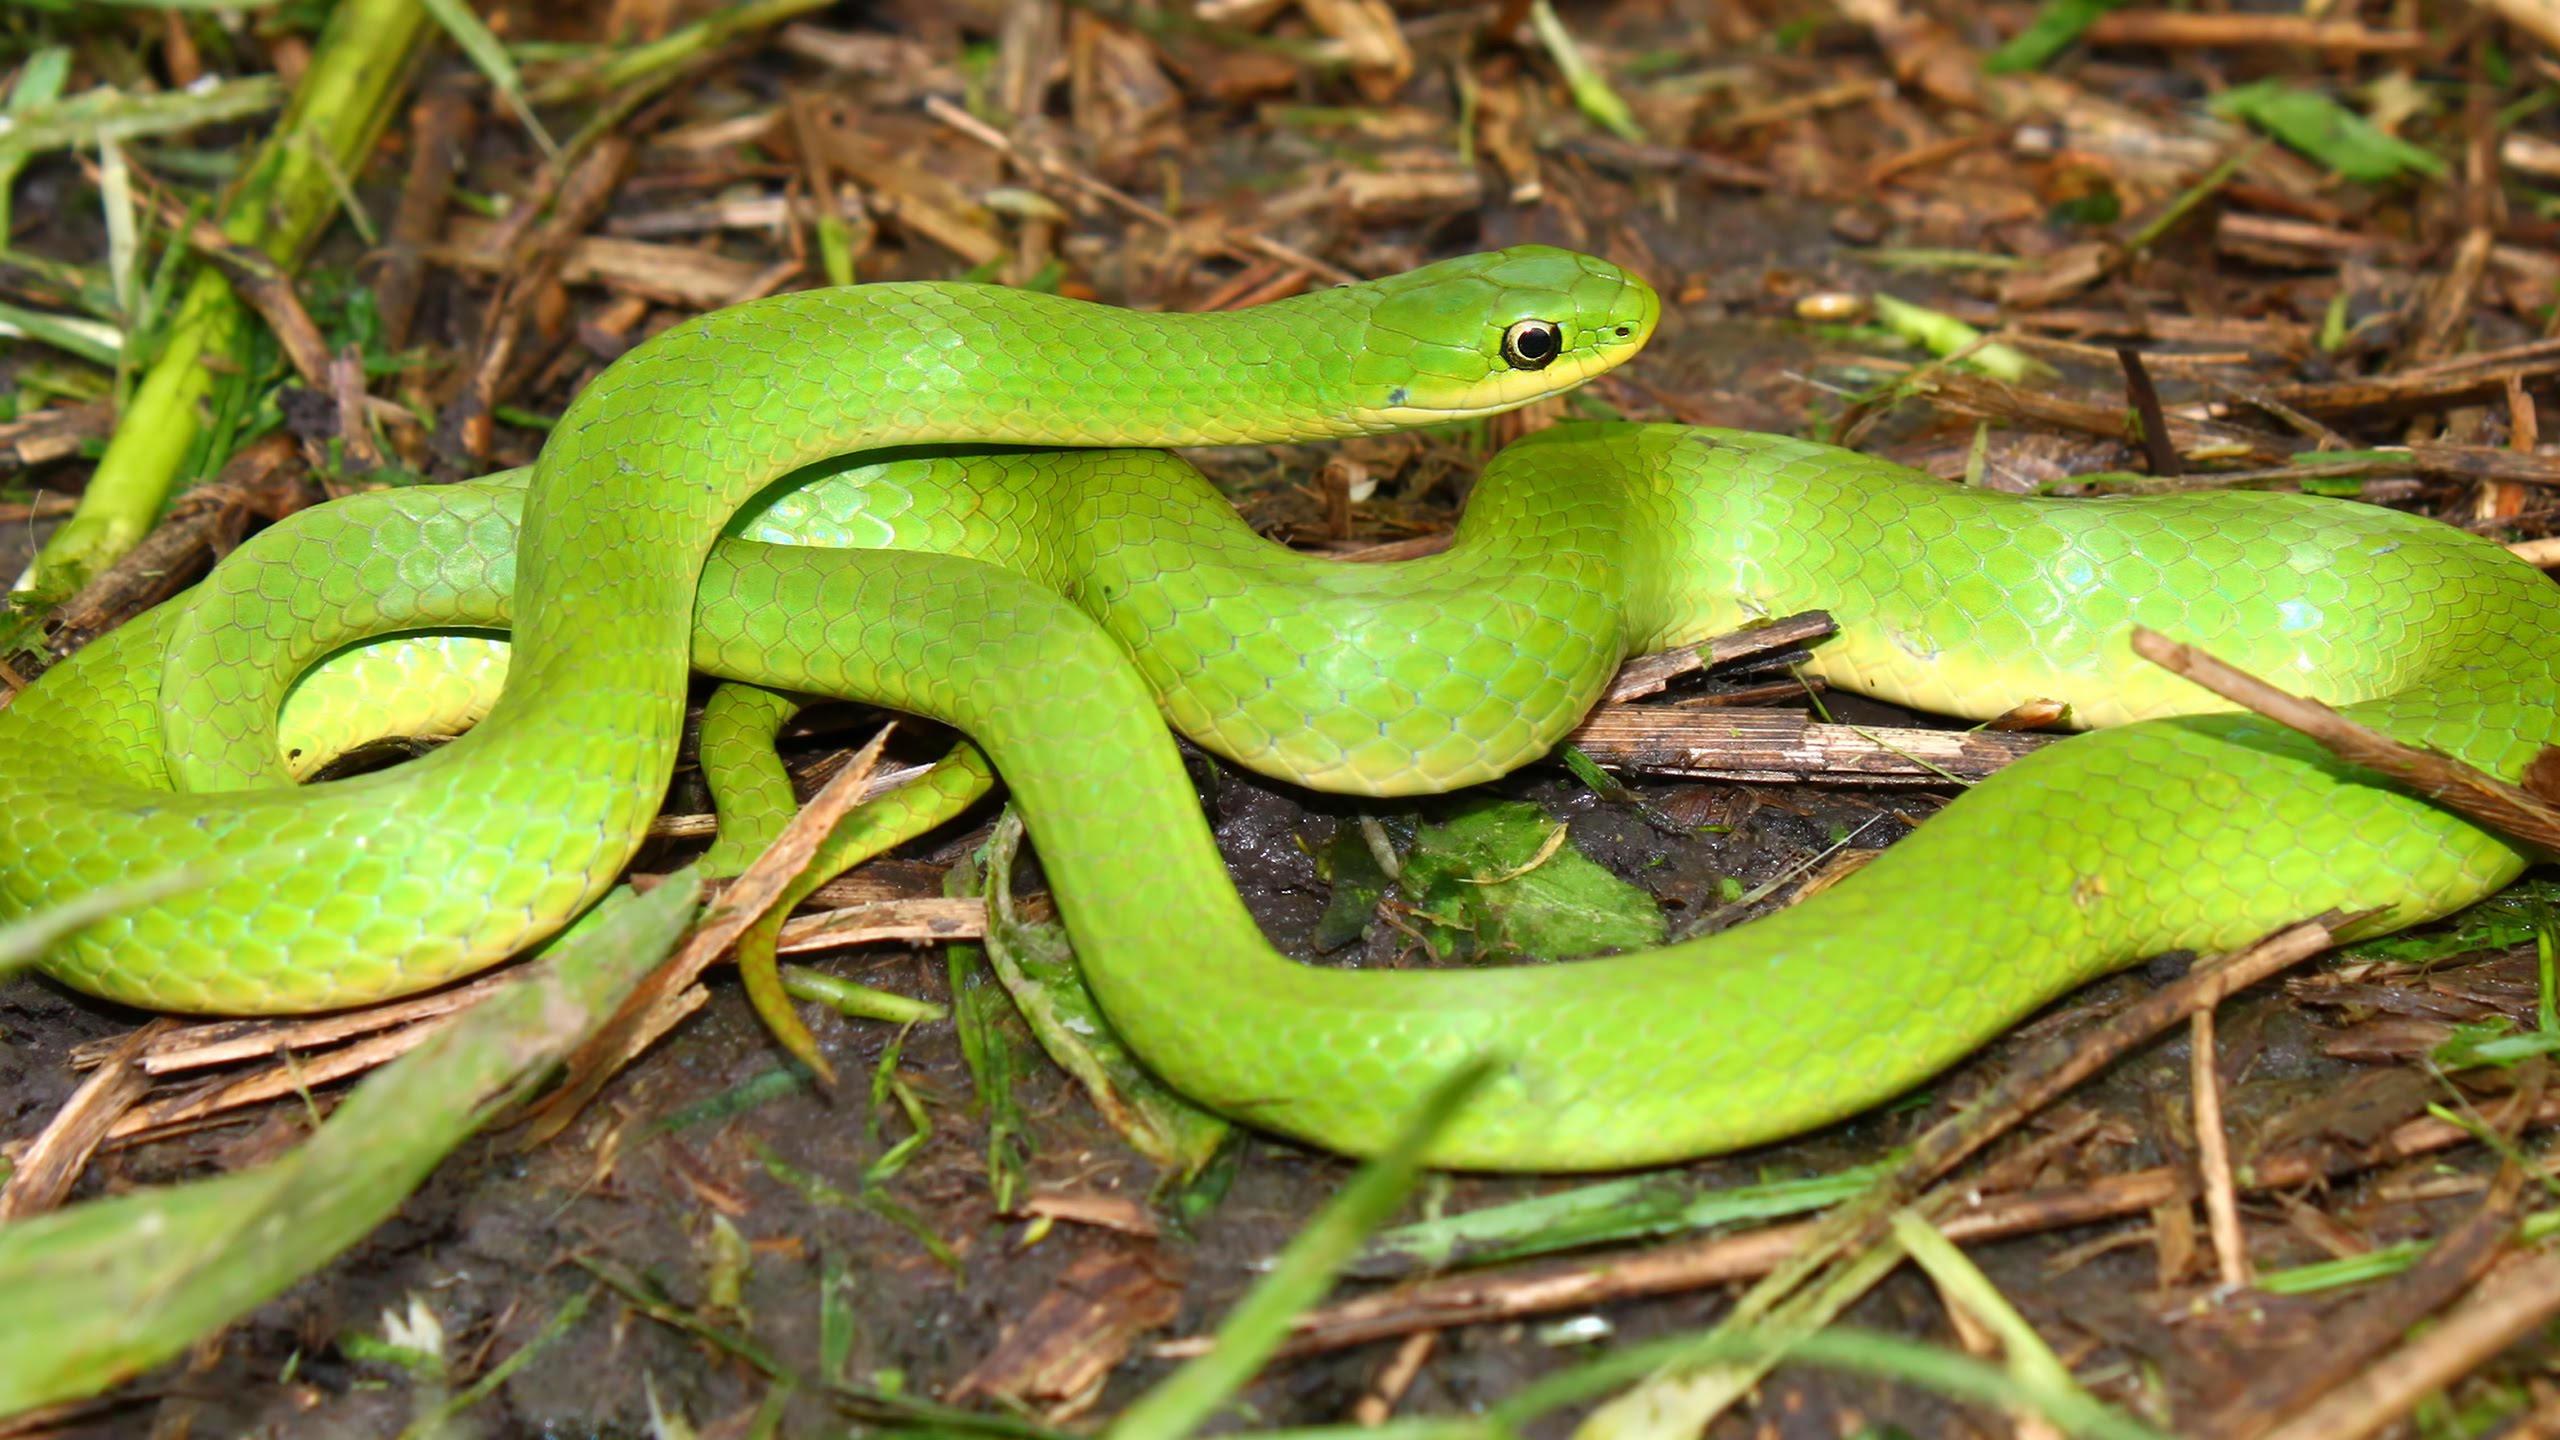 DONATE: Smooth Green Snake - YouTube